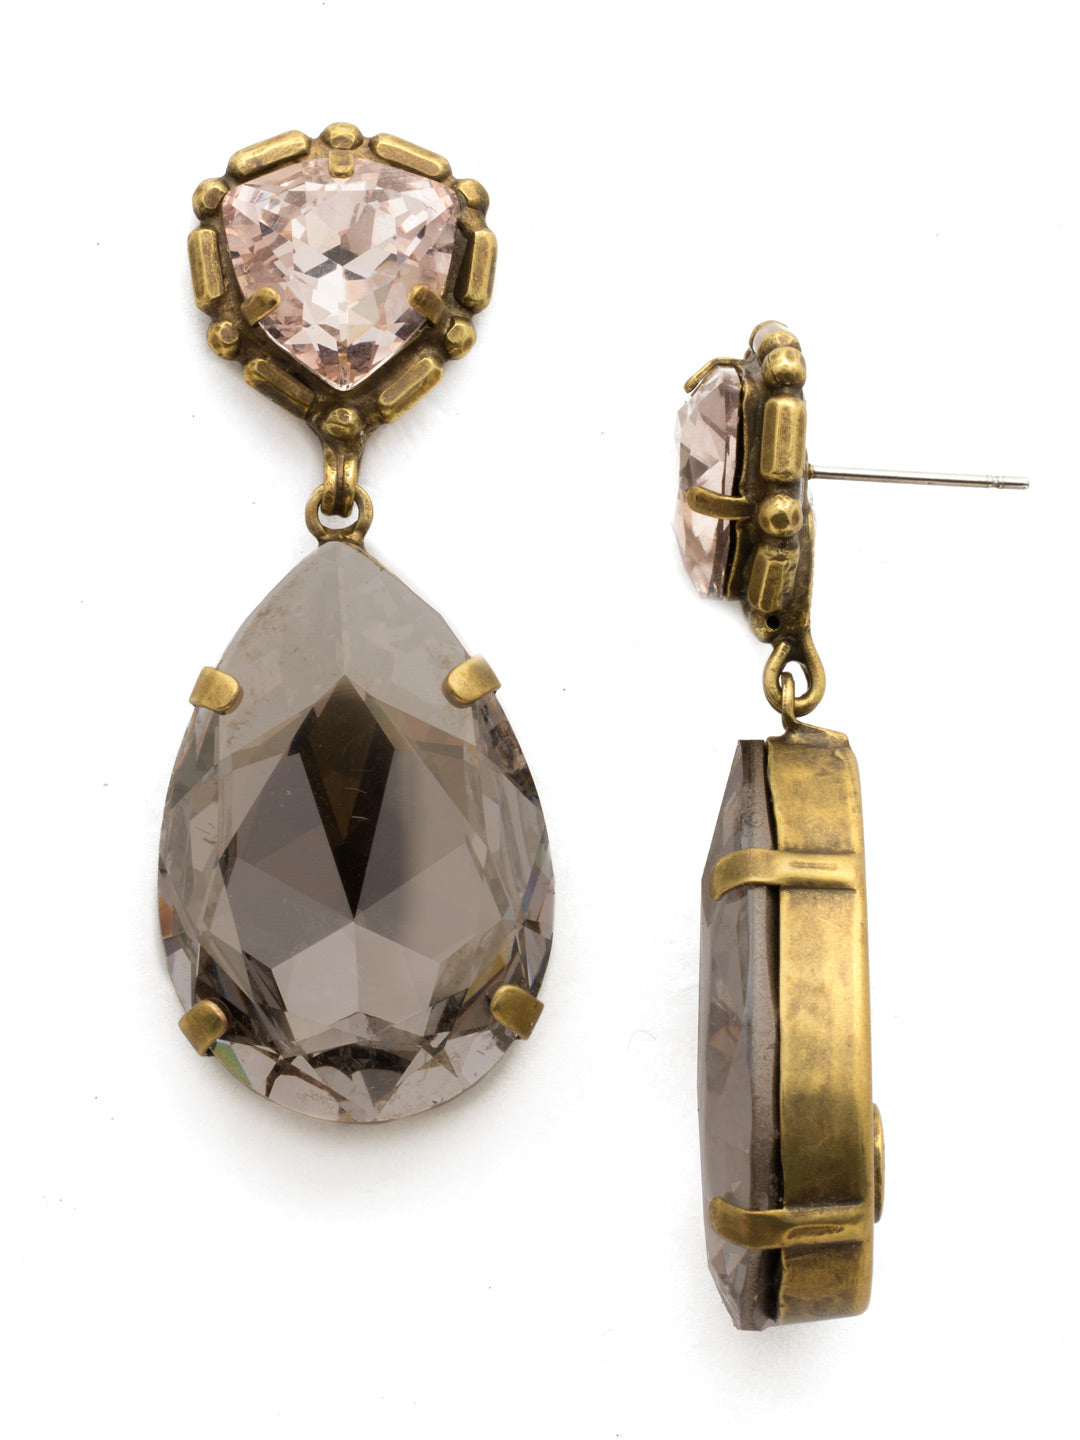 Yucca Dangle Earrings - EDX20AGSTN - <p>A statement style with a pentagon shaped crystal laid in a decorative metal design on top of a large dangling tear drop stone. From Sorrelli's Sandstone collection in our Antique Gold-tone finish.</p>